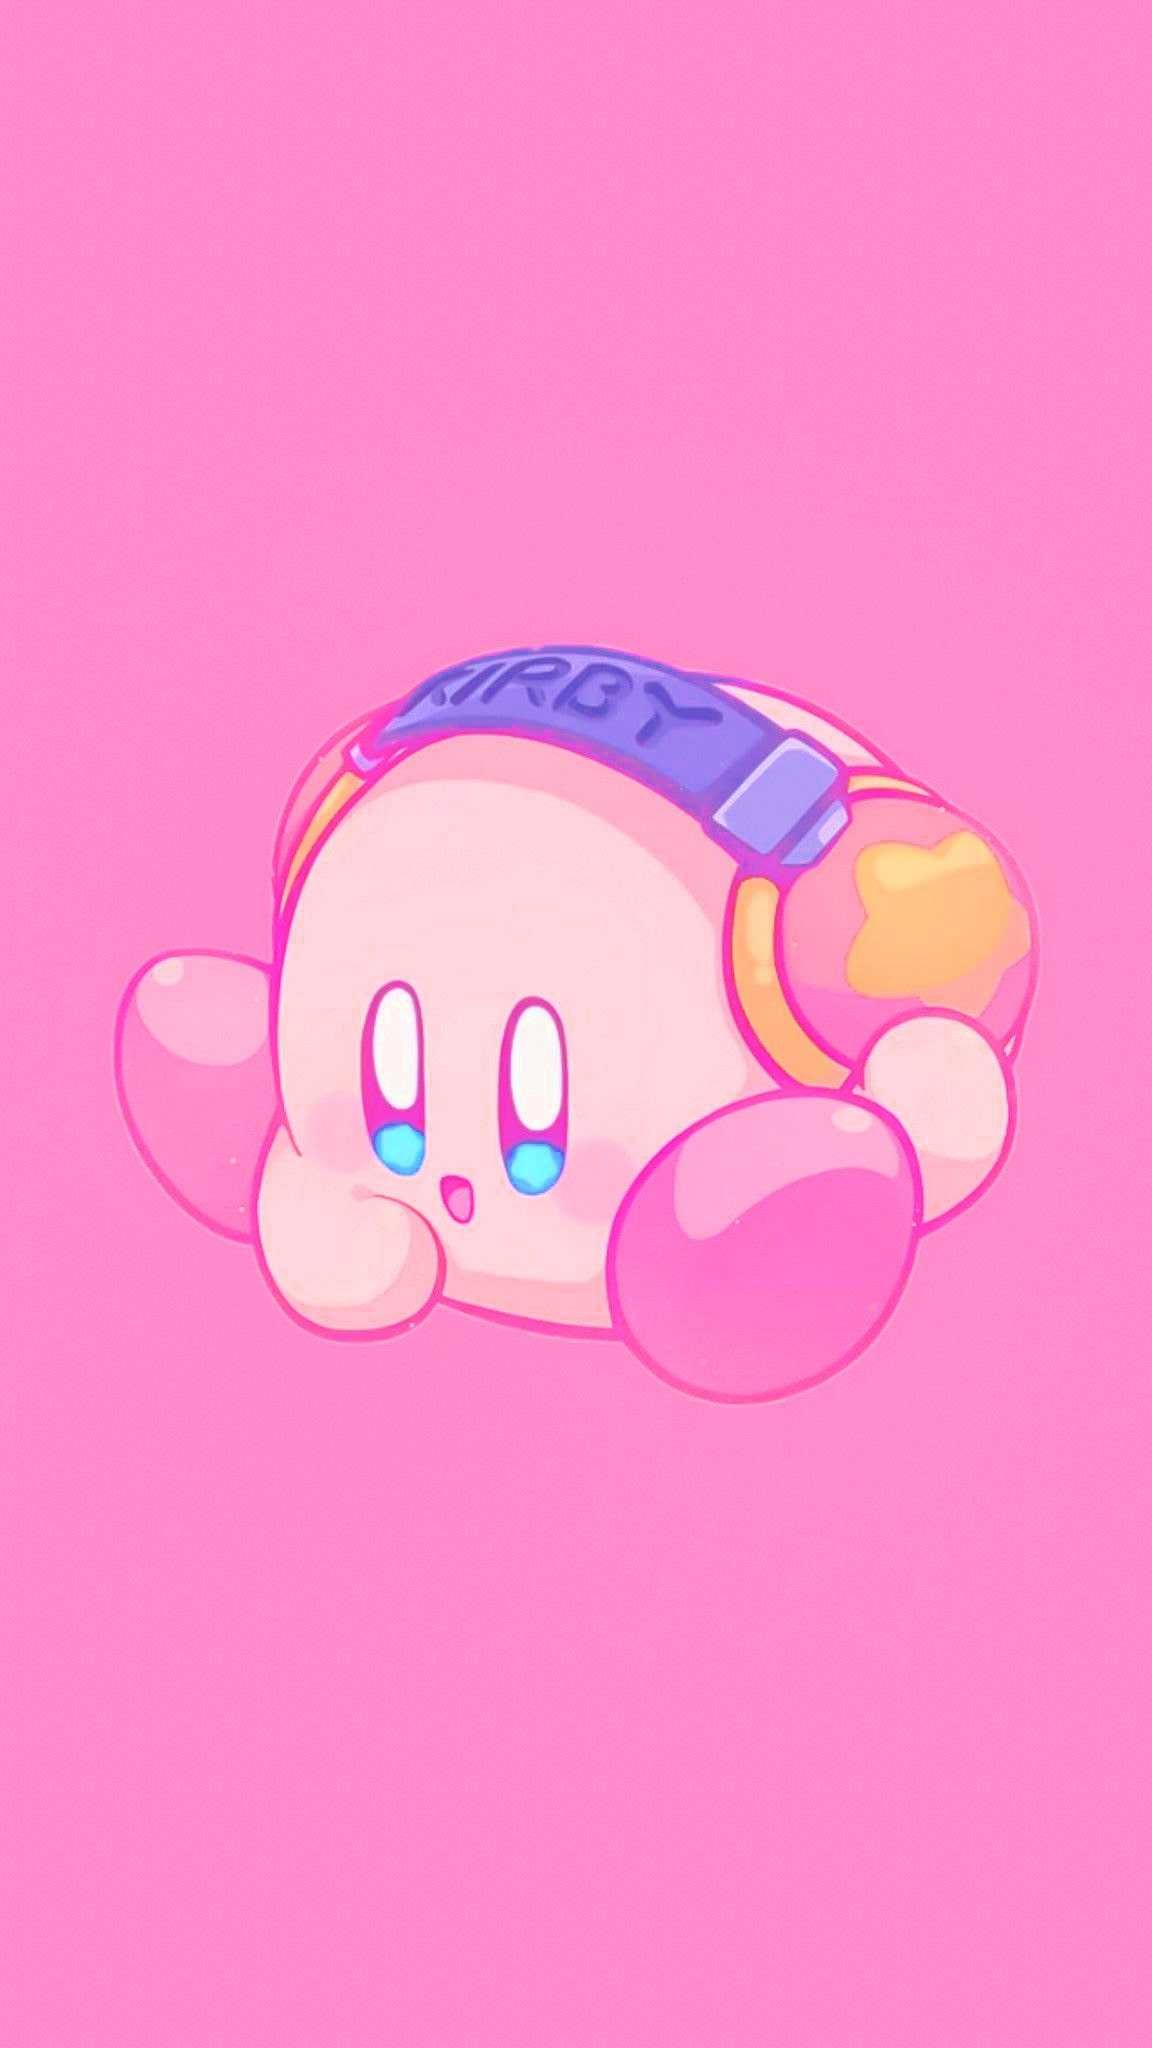 Cute Kirby Wallpaper Discover More Game, Kirby, Video Game Wallpaper. /cute Kirby Wallpaper/. Cute Wallpaper, Kawaii Wallpaper, Wallpaper